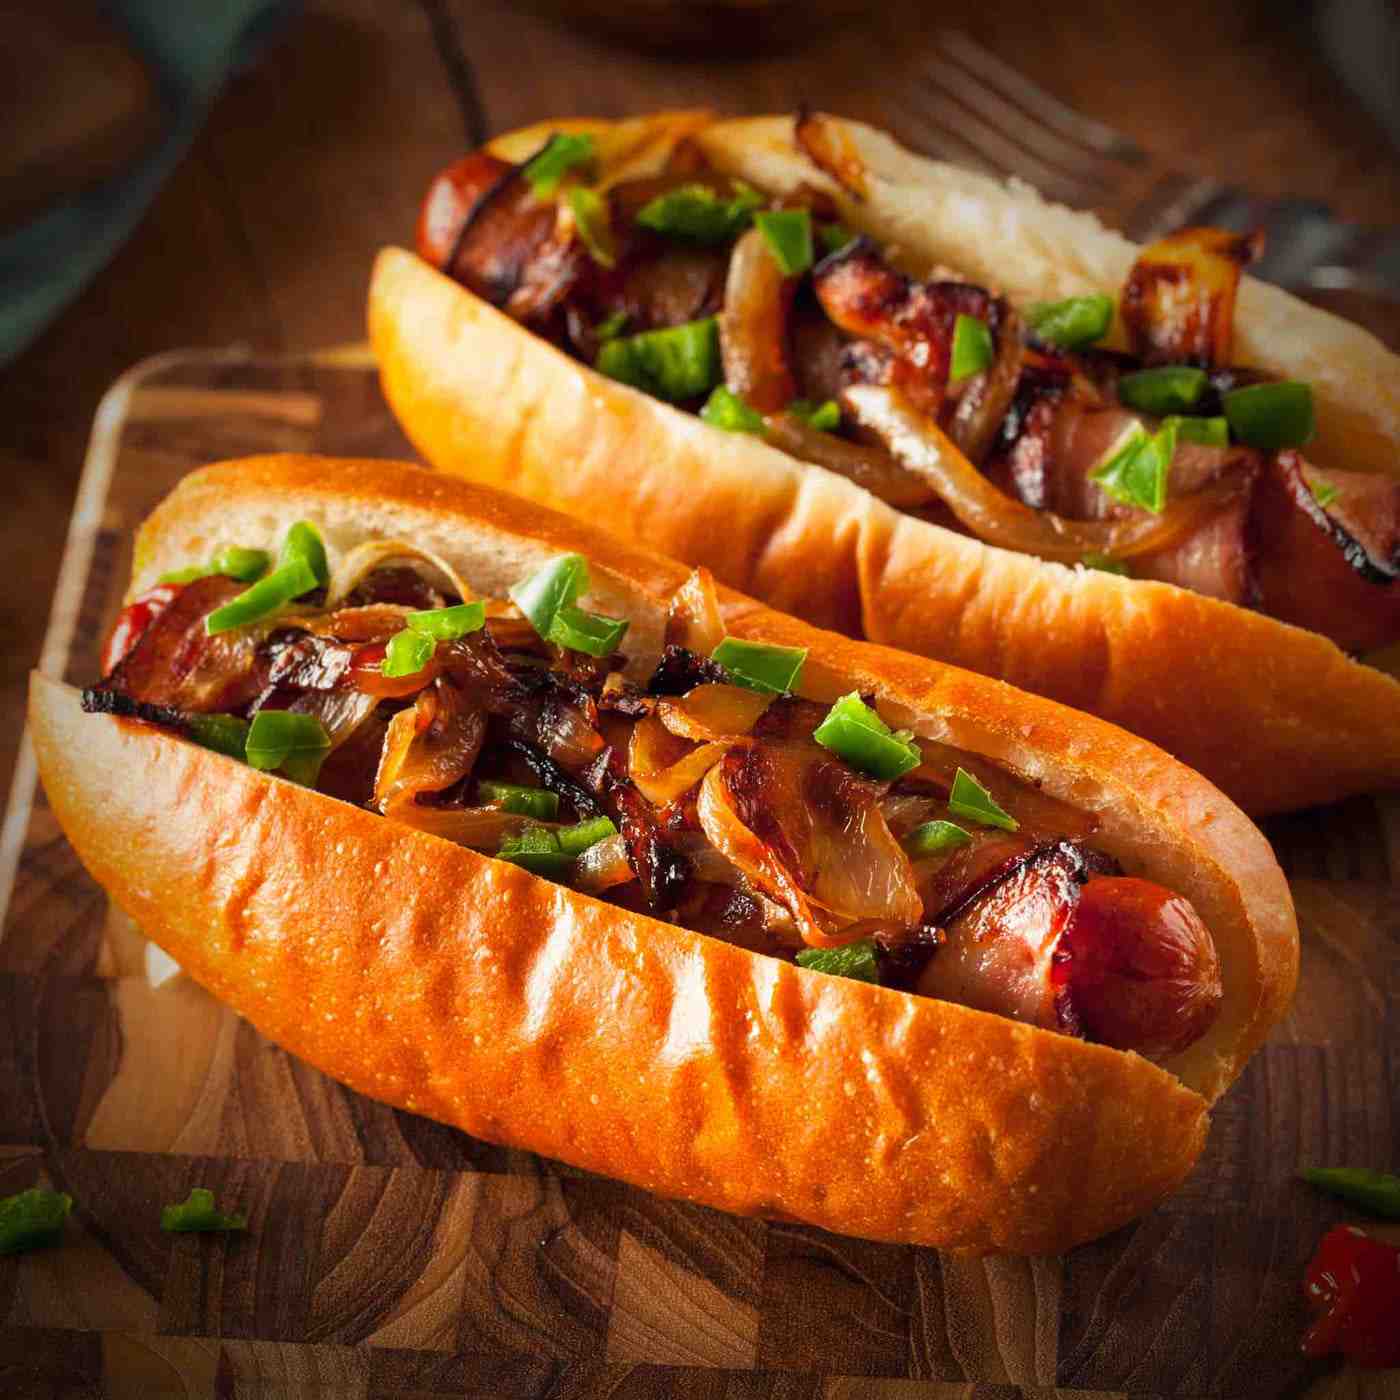 Do beef hot dogs have pork in them?